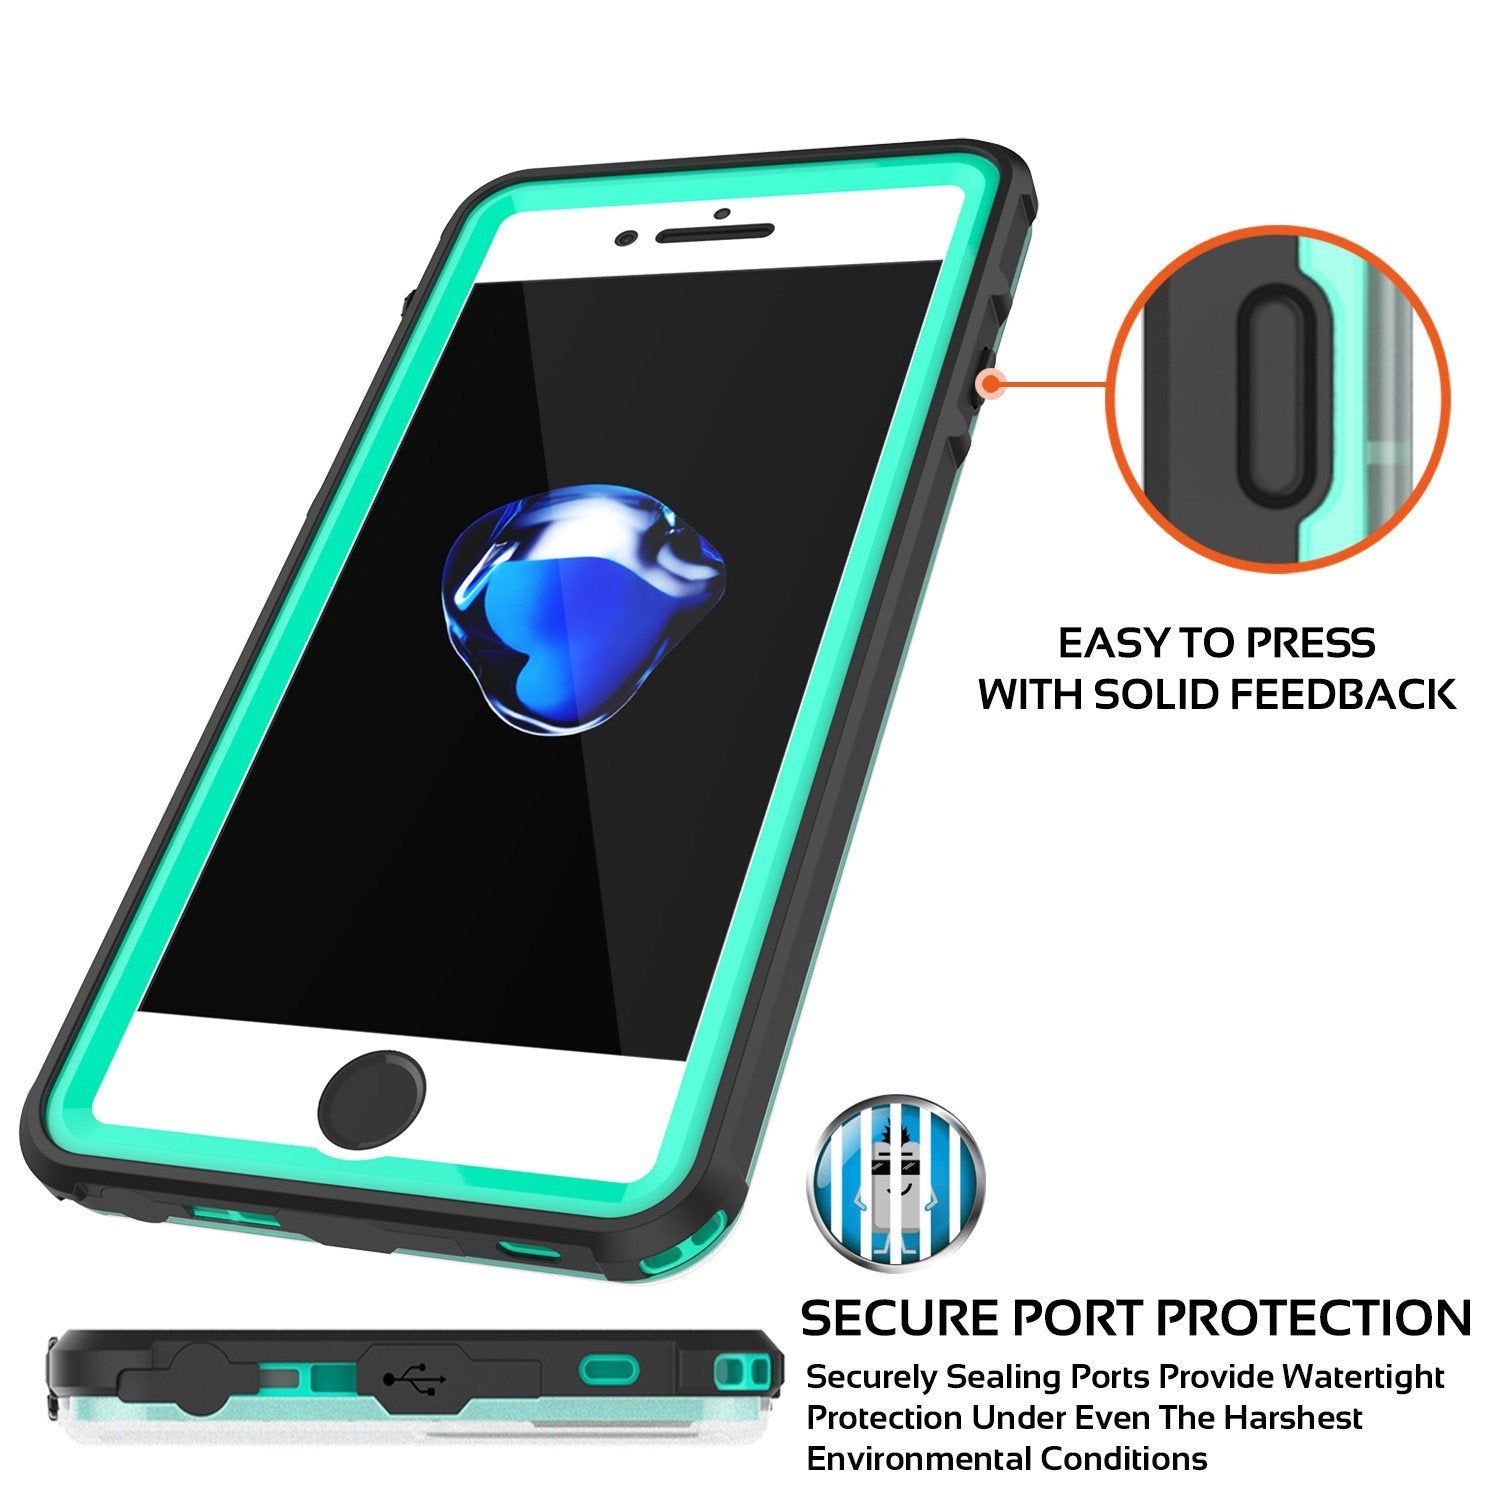 iPhone 8+ Plus Waterproof Case, PUNKcase CRYSTAL Teal W/ Attached Screen Protector  | Warranty - PunkCase NZ